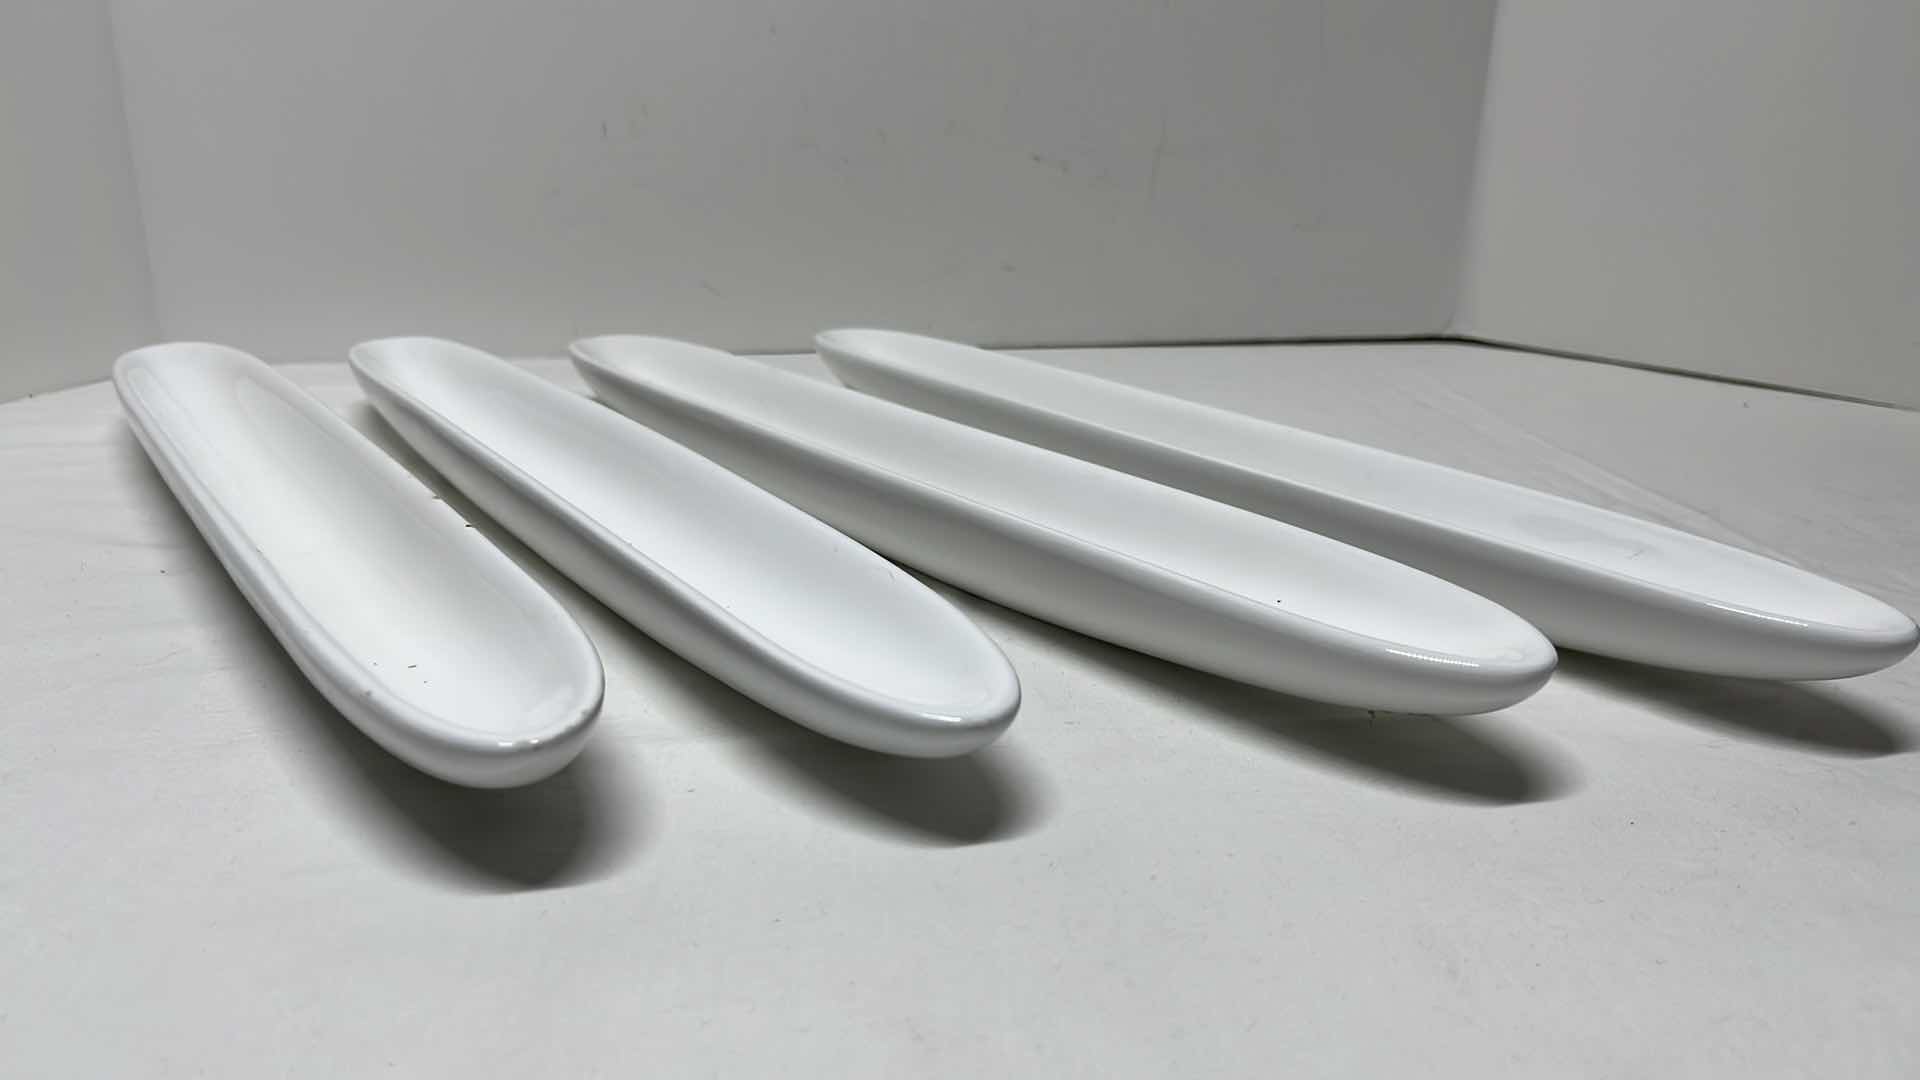 Photo 2 of BOAT STYLE PLATES, BUTTER DISH, BOWL & SMALL PLATES (10 PCS)